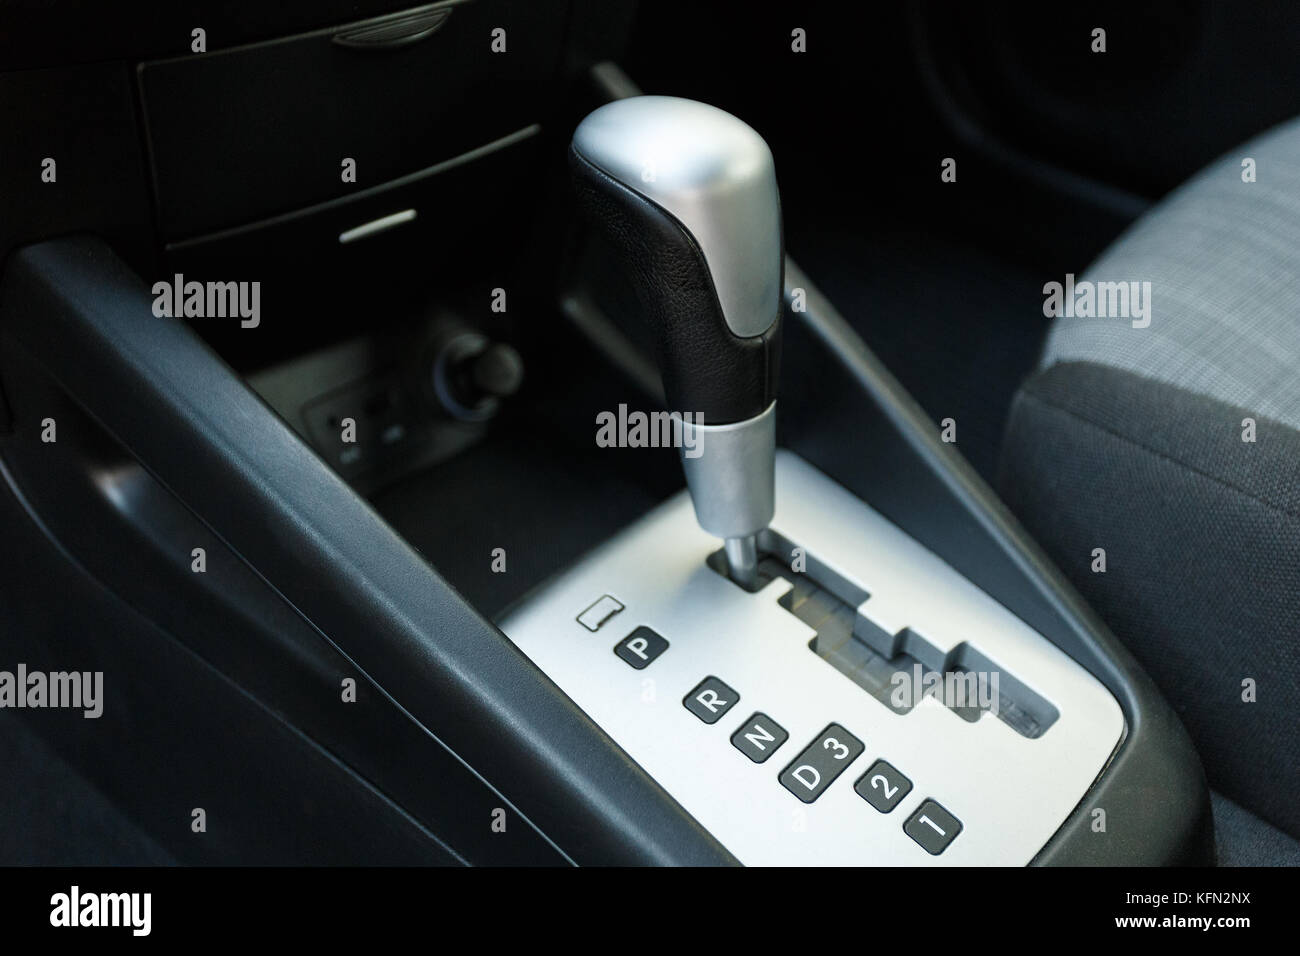 Automatic transmission car, detail of modern car interior, close up Stock Photo